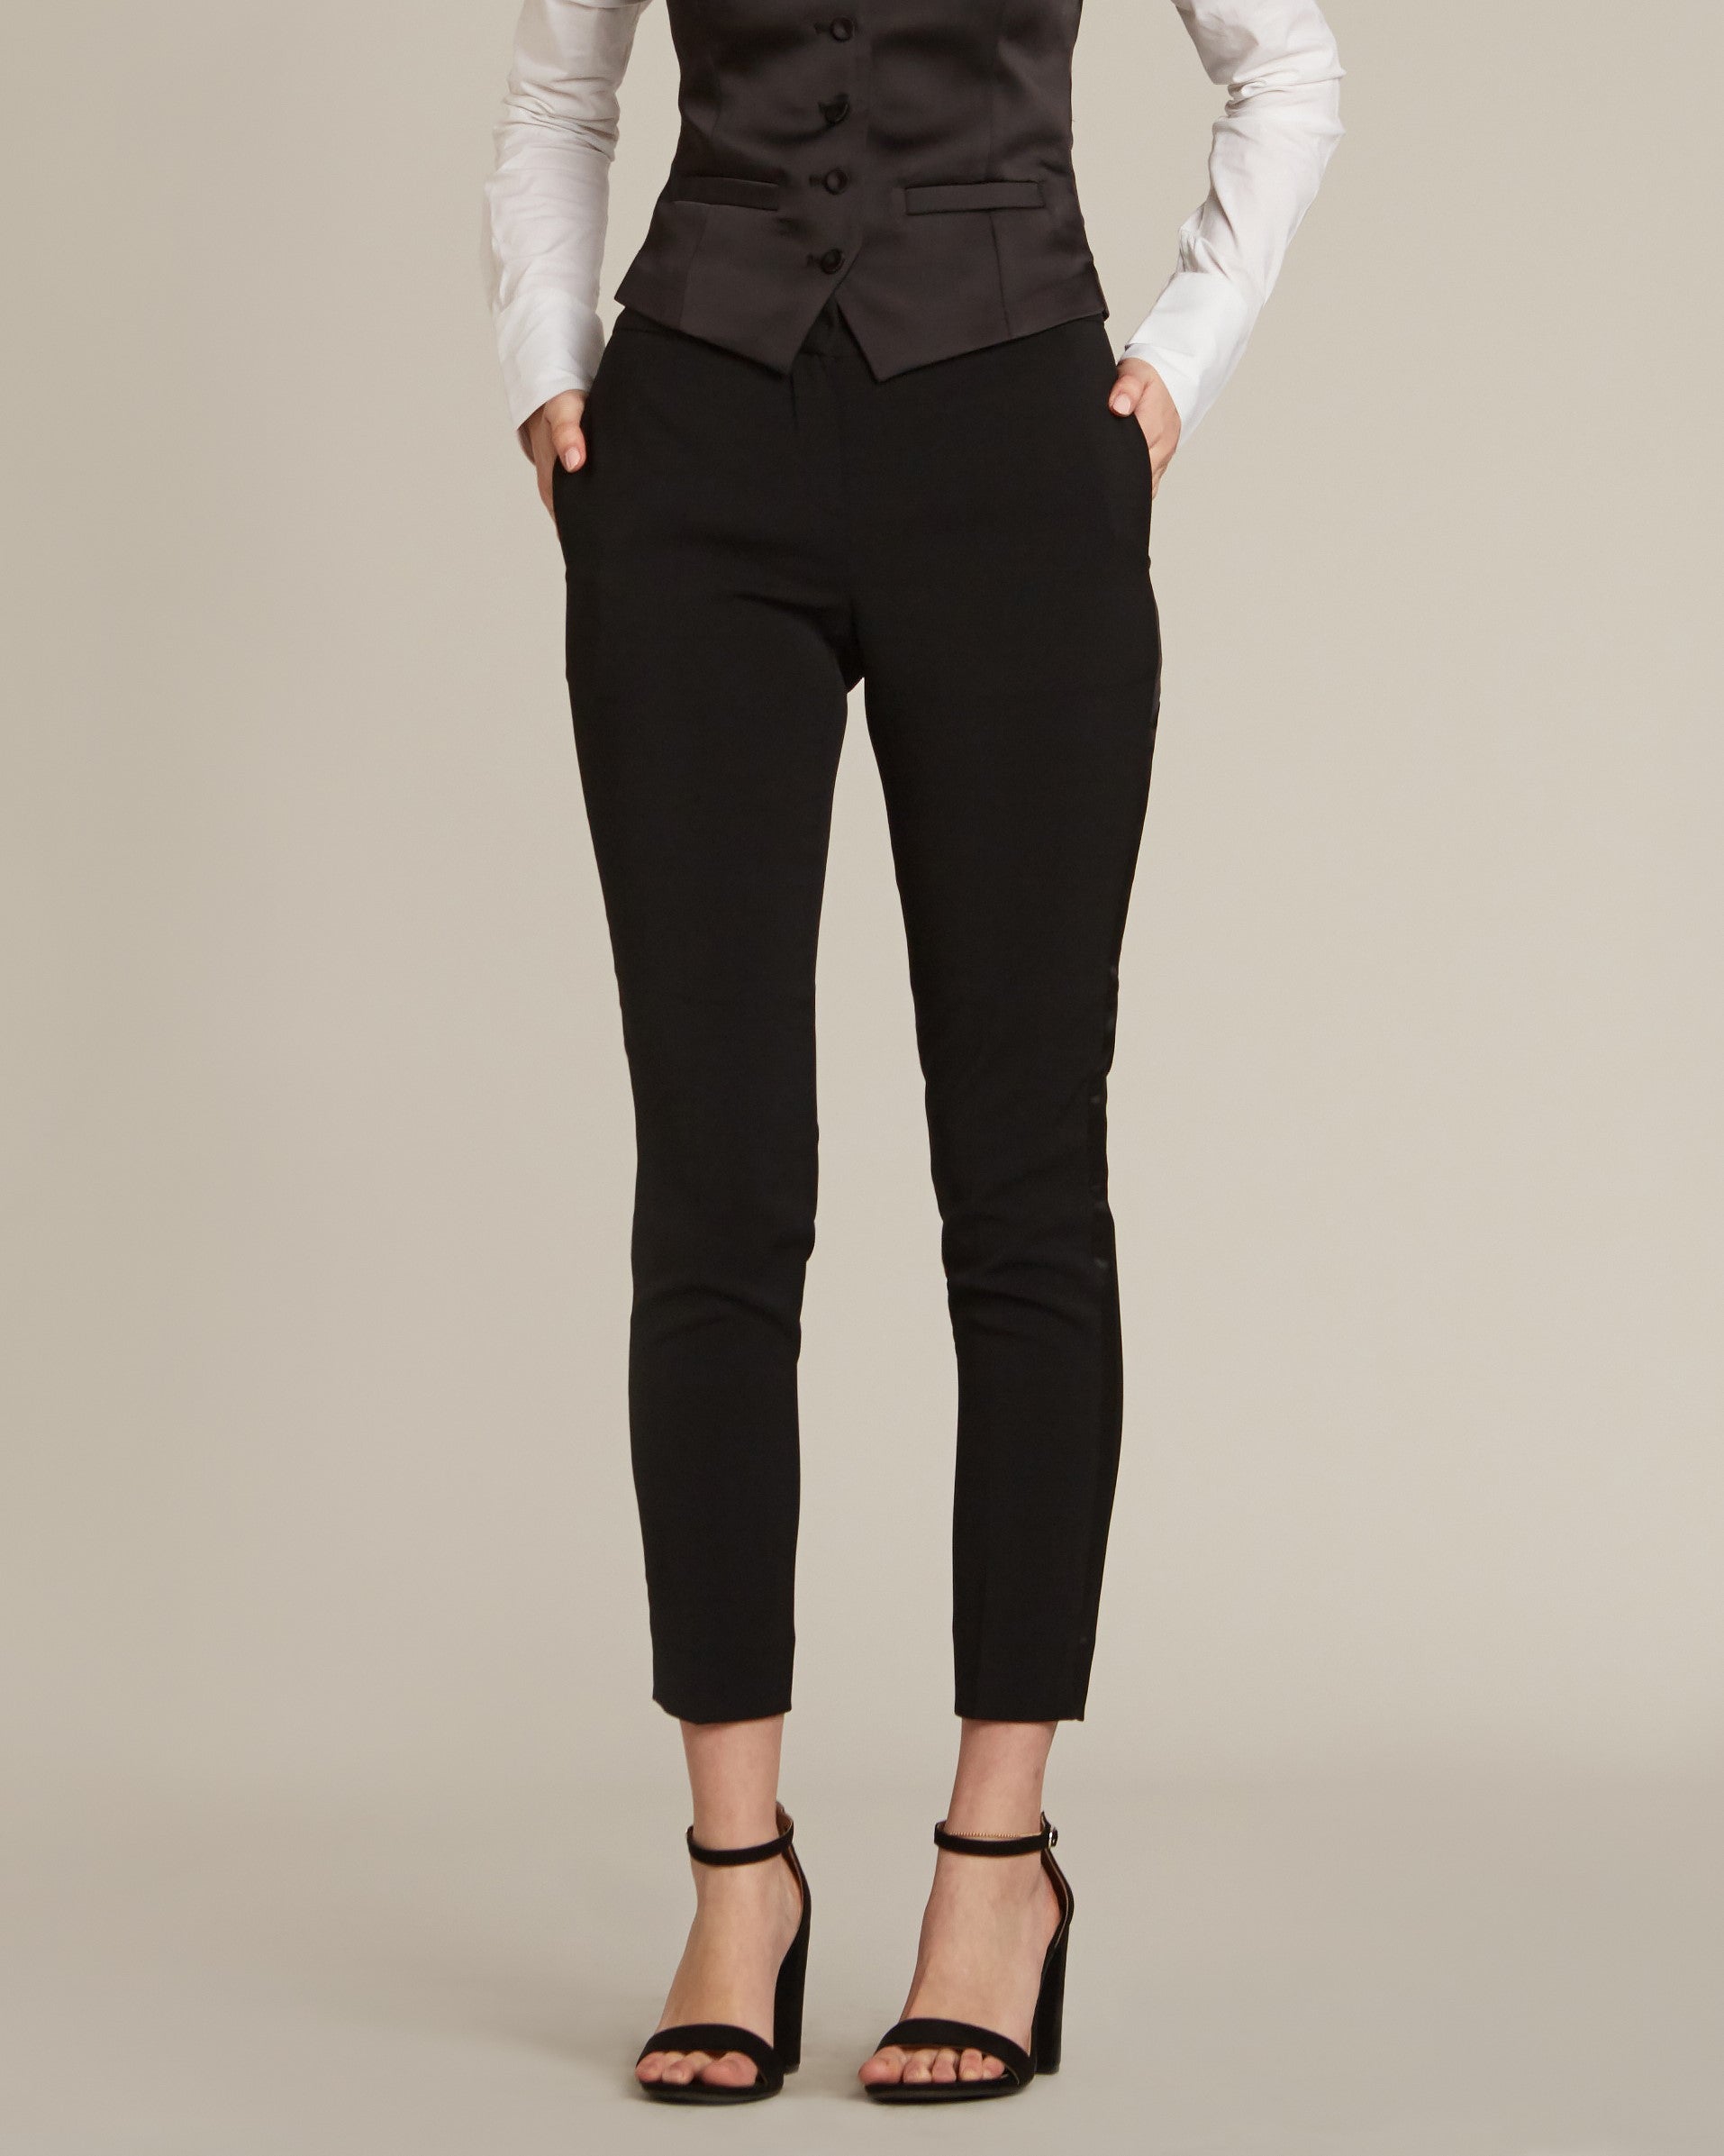 TINTED Black Formal Pants for Women